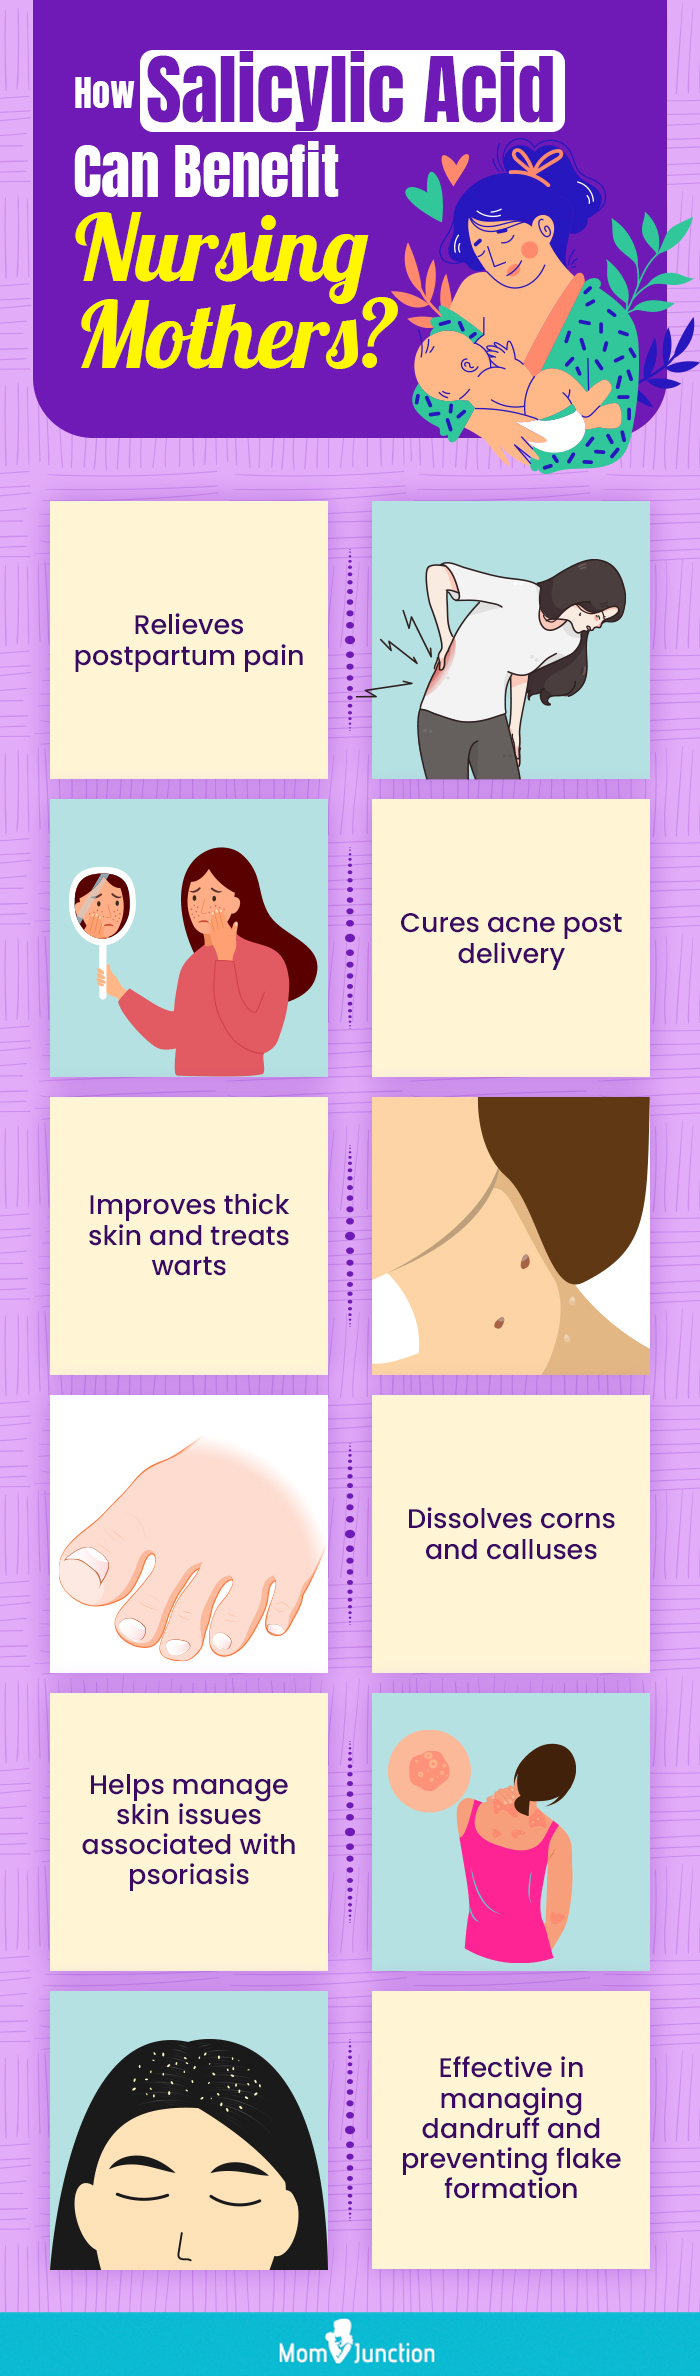 how salicylic acid can benefit nursing mothers [infographic]